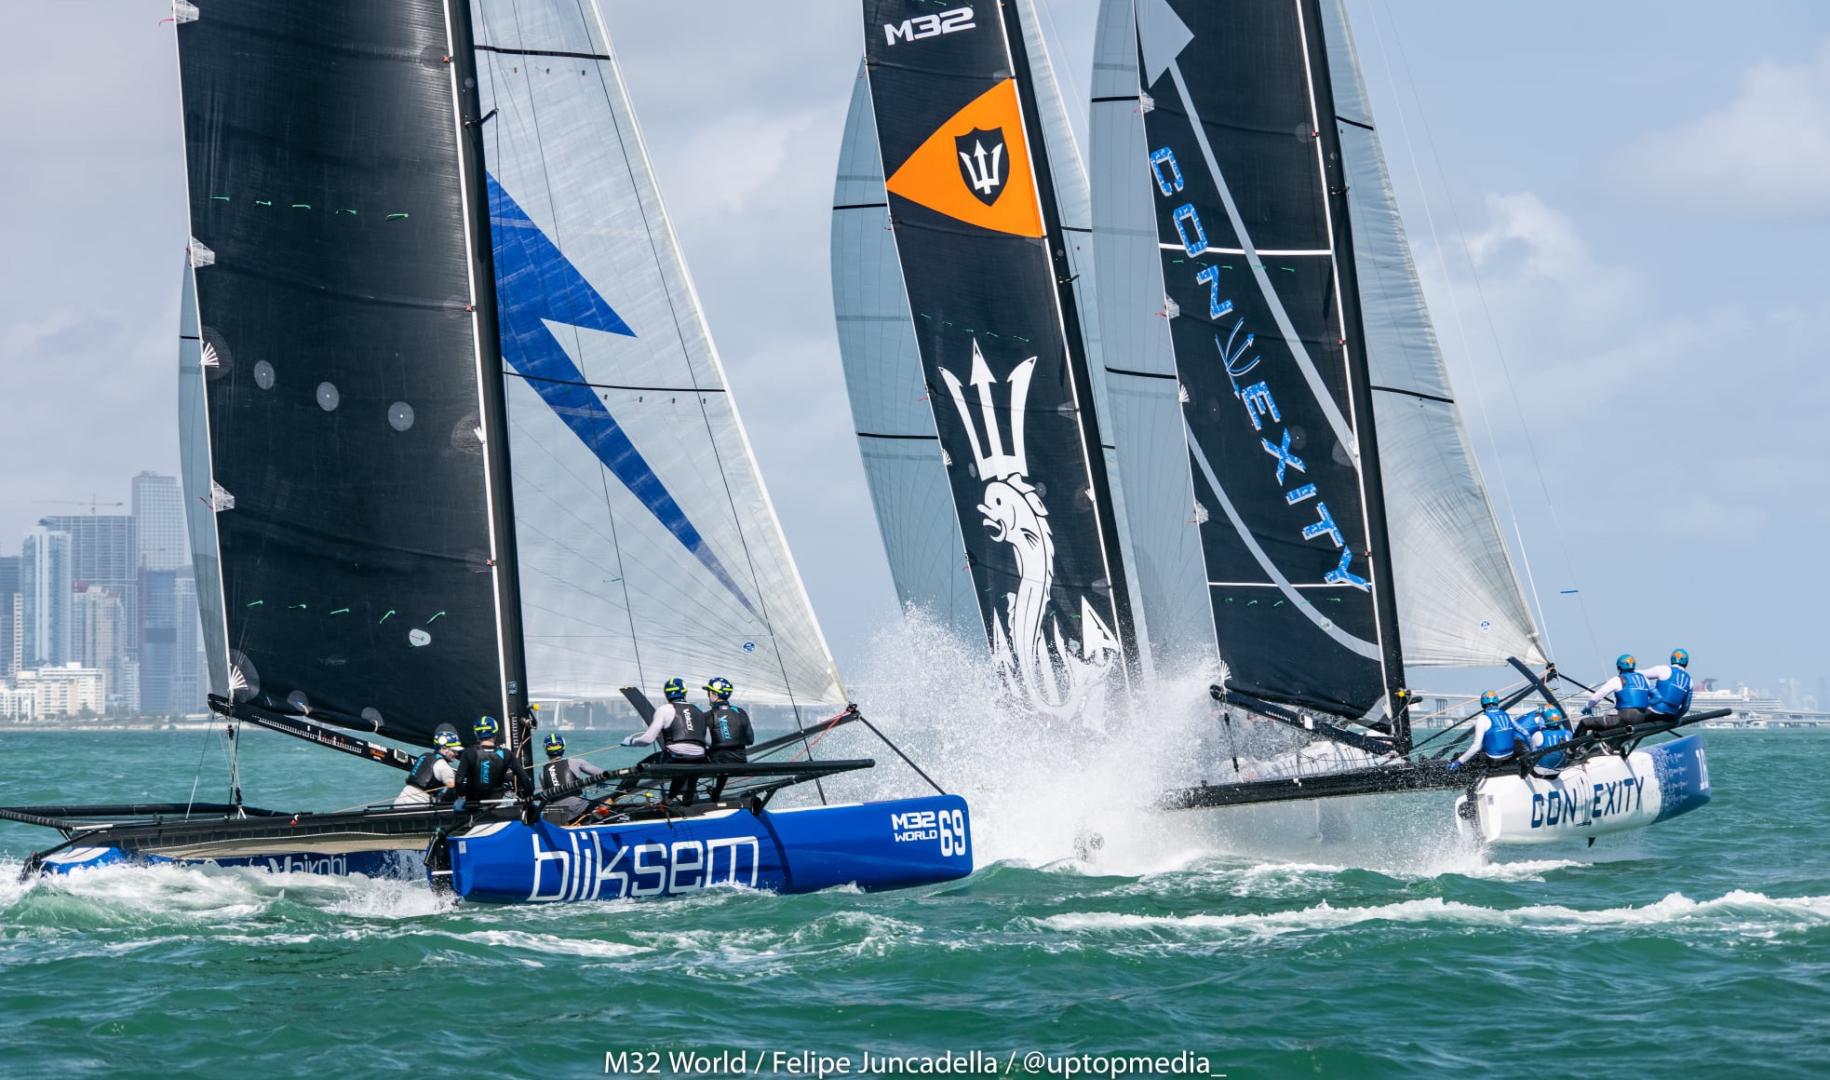 Last Race Decided Miami Winter Seriesran, throughout four weekends